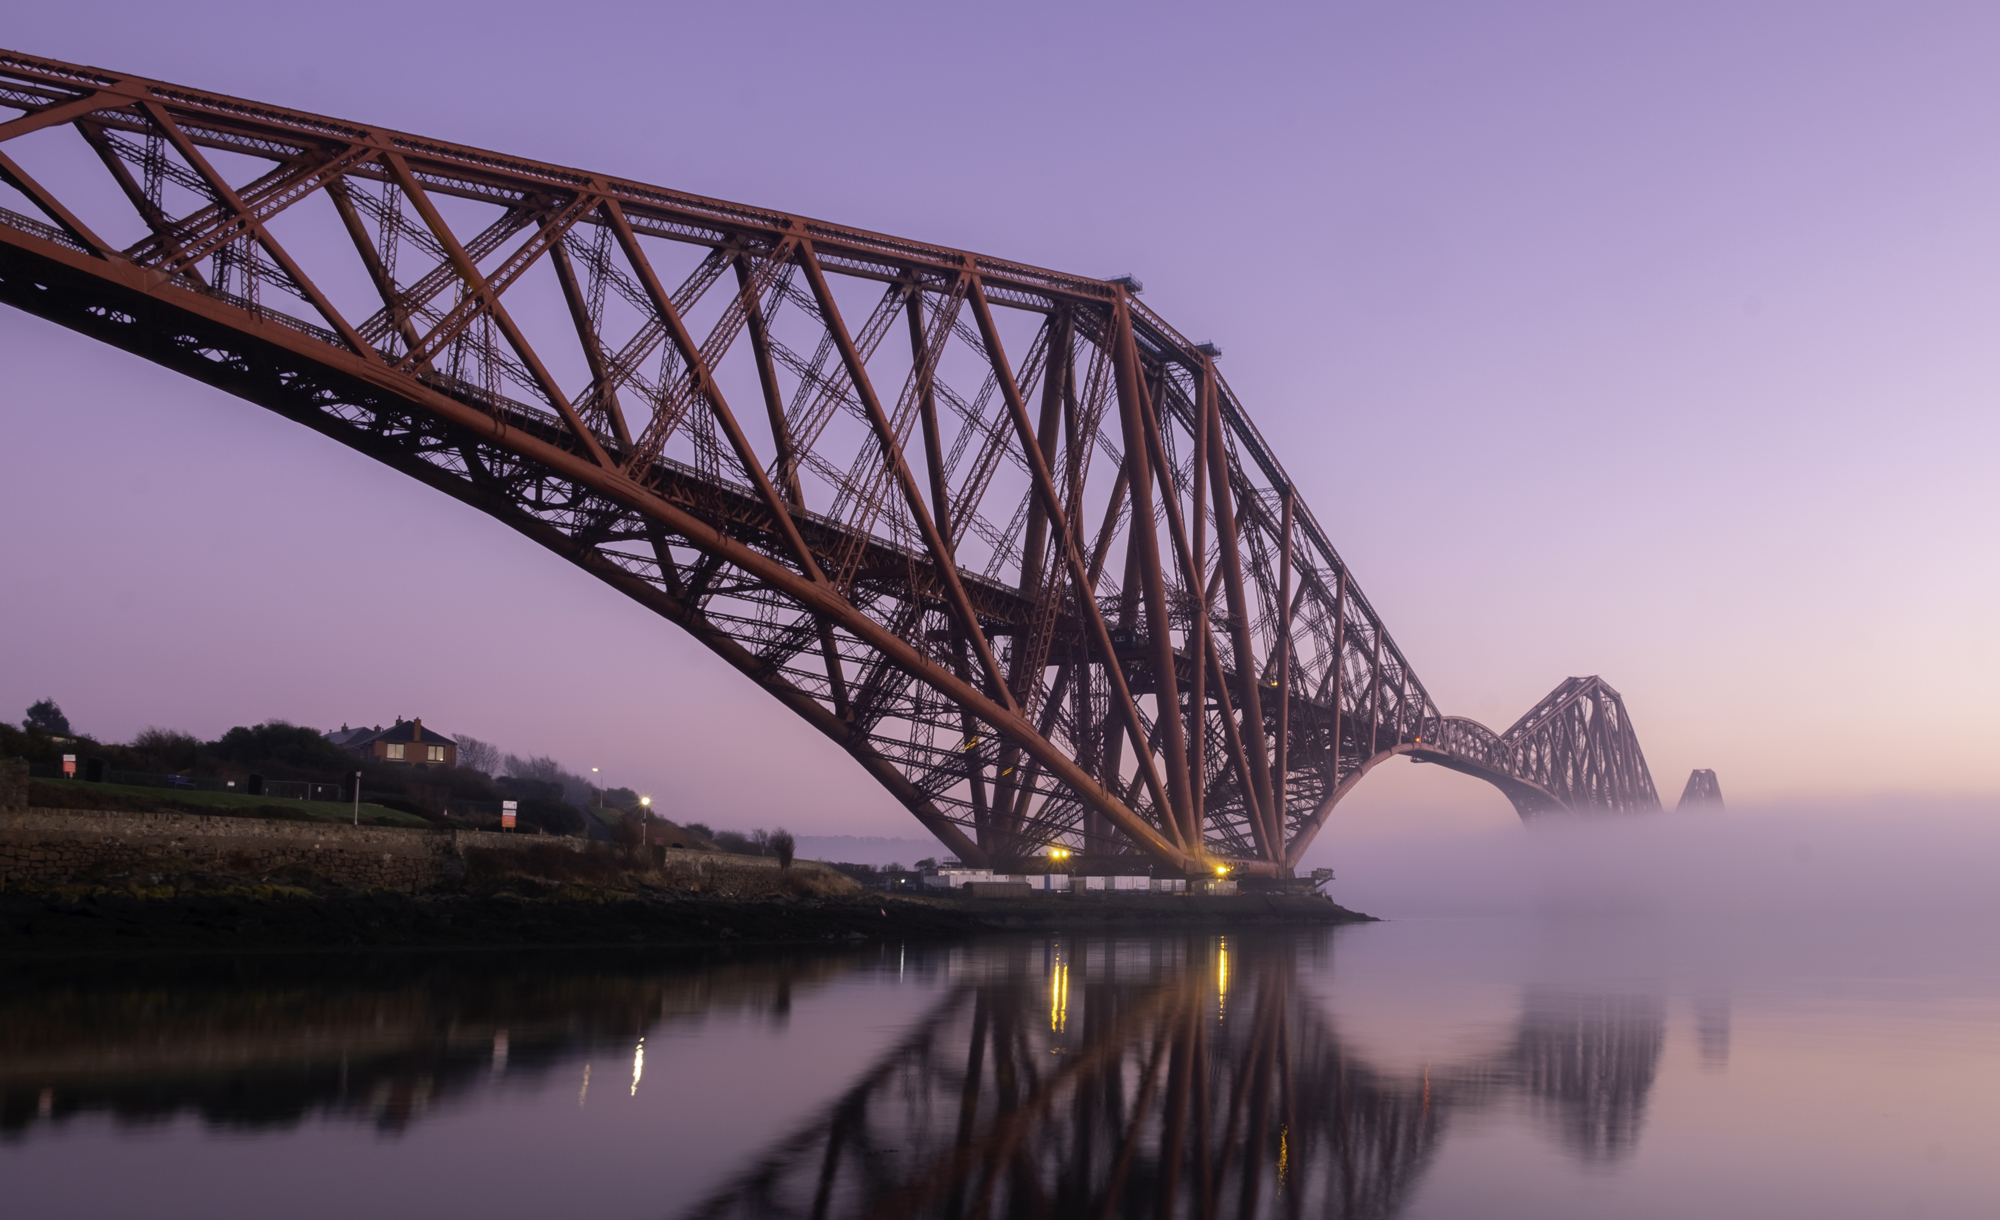 Landscape image taken of the Forth Rail Bridge, North Queensferry at sunset